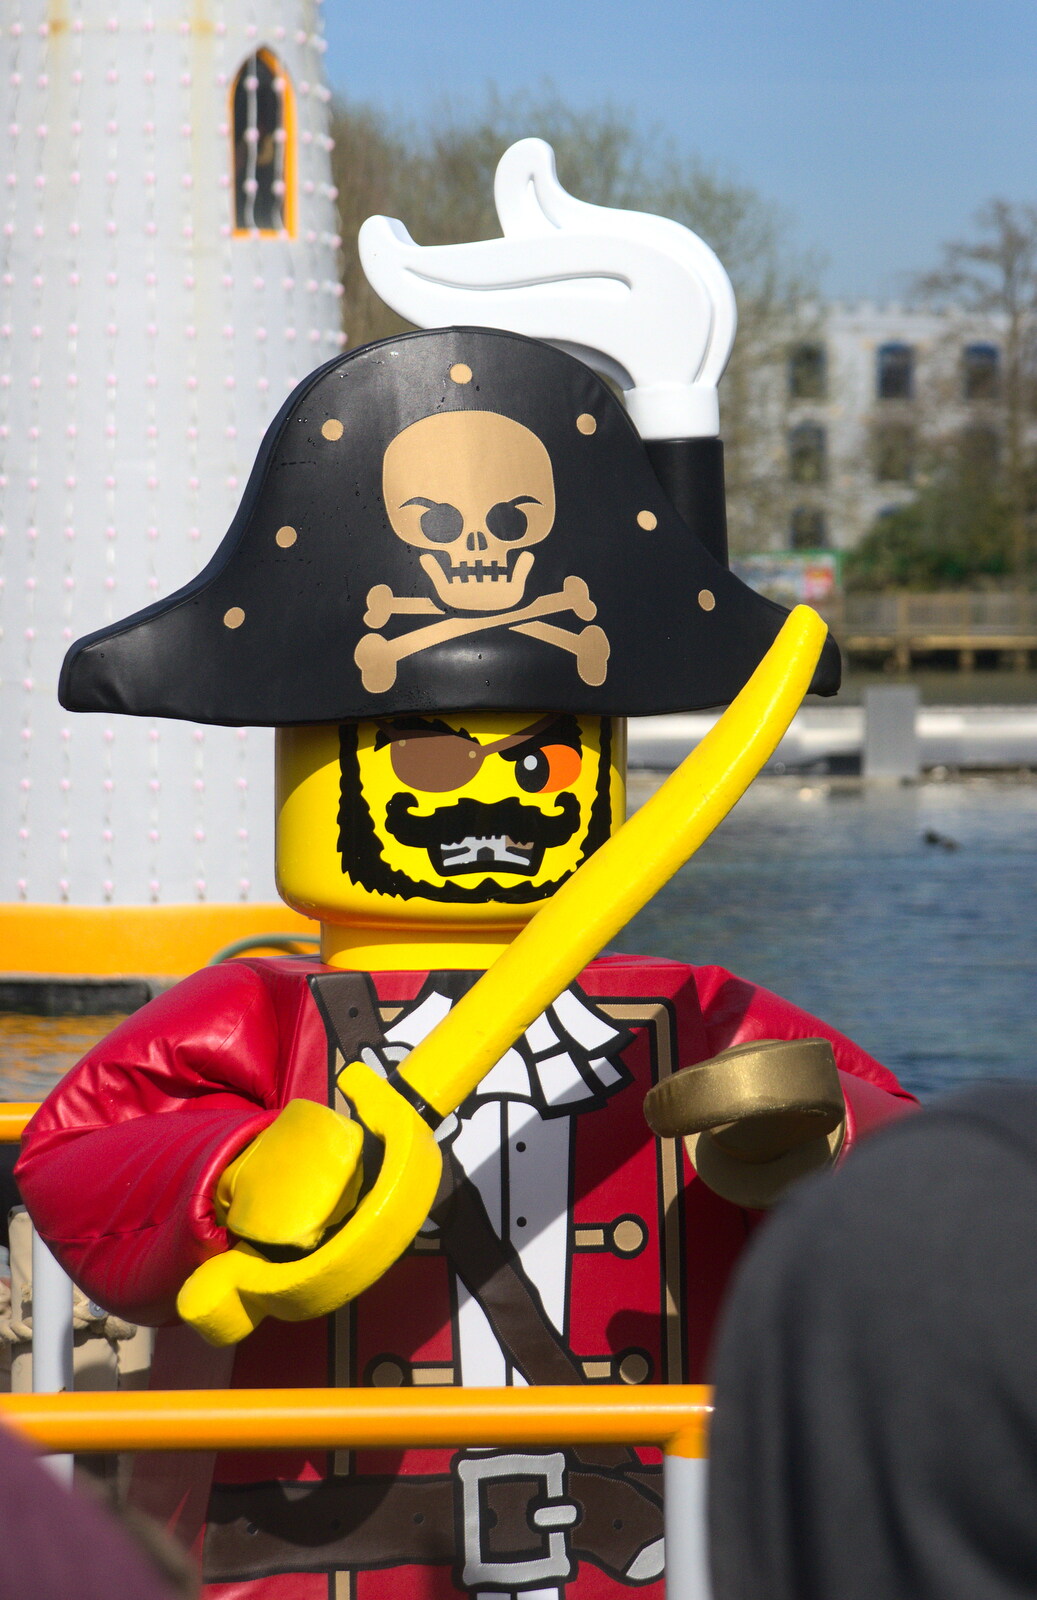 A Lego pirate captain from A Trip to Legoland, Windsor, Berkshire - 25th March 2017